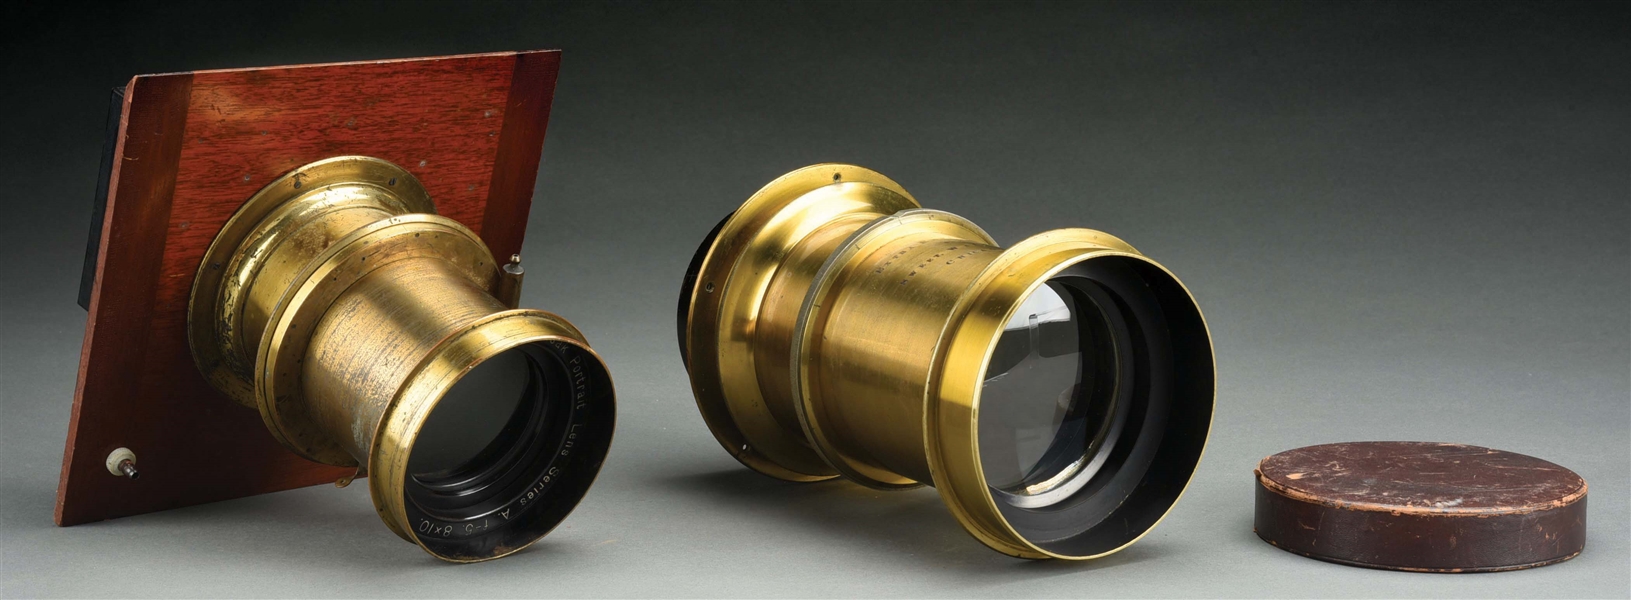 PAIR OF LARGE FORMAT BRASS PORTRAIT LENSES SWEET & WALLACH AND WOLLENSAK.